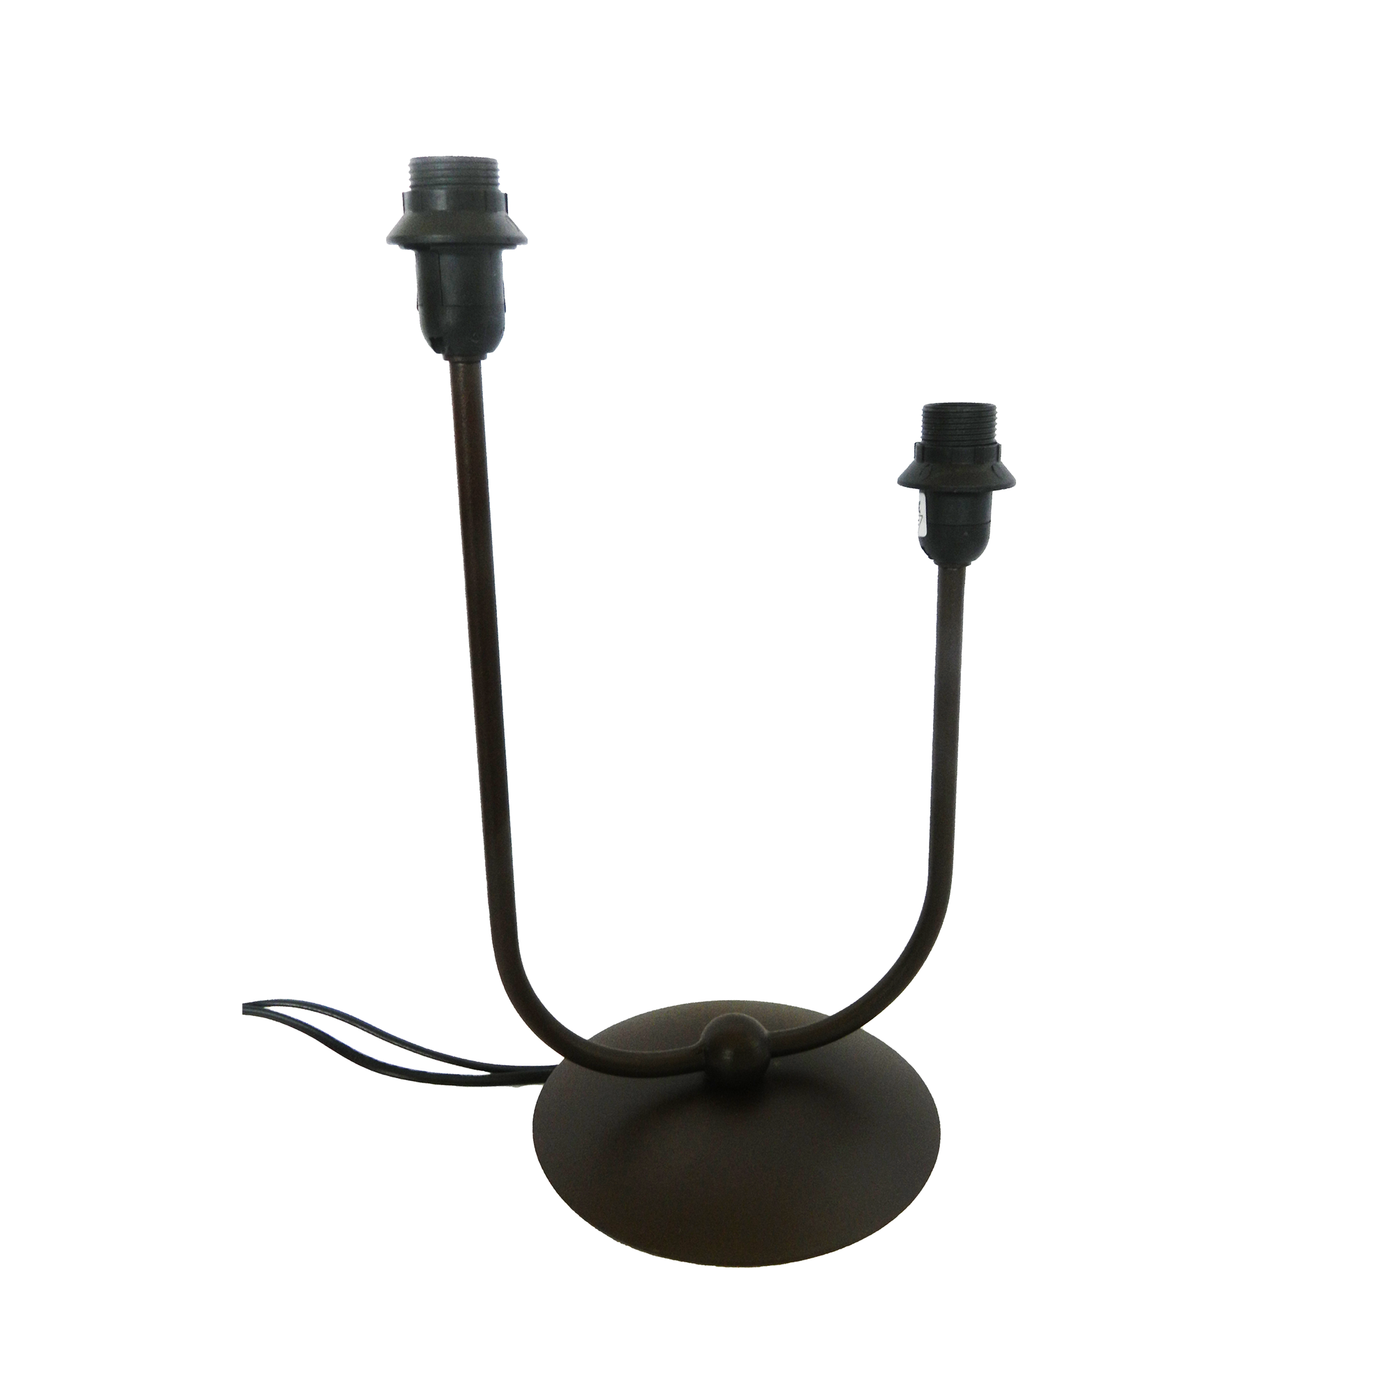 Brown double lamp base